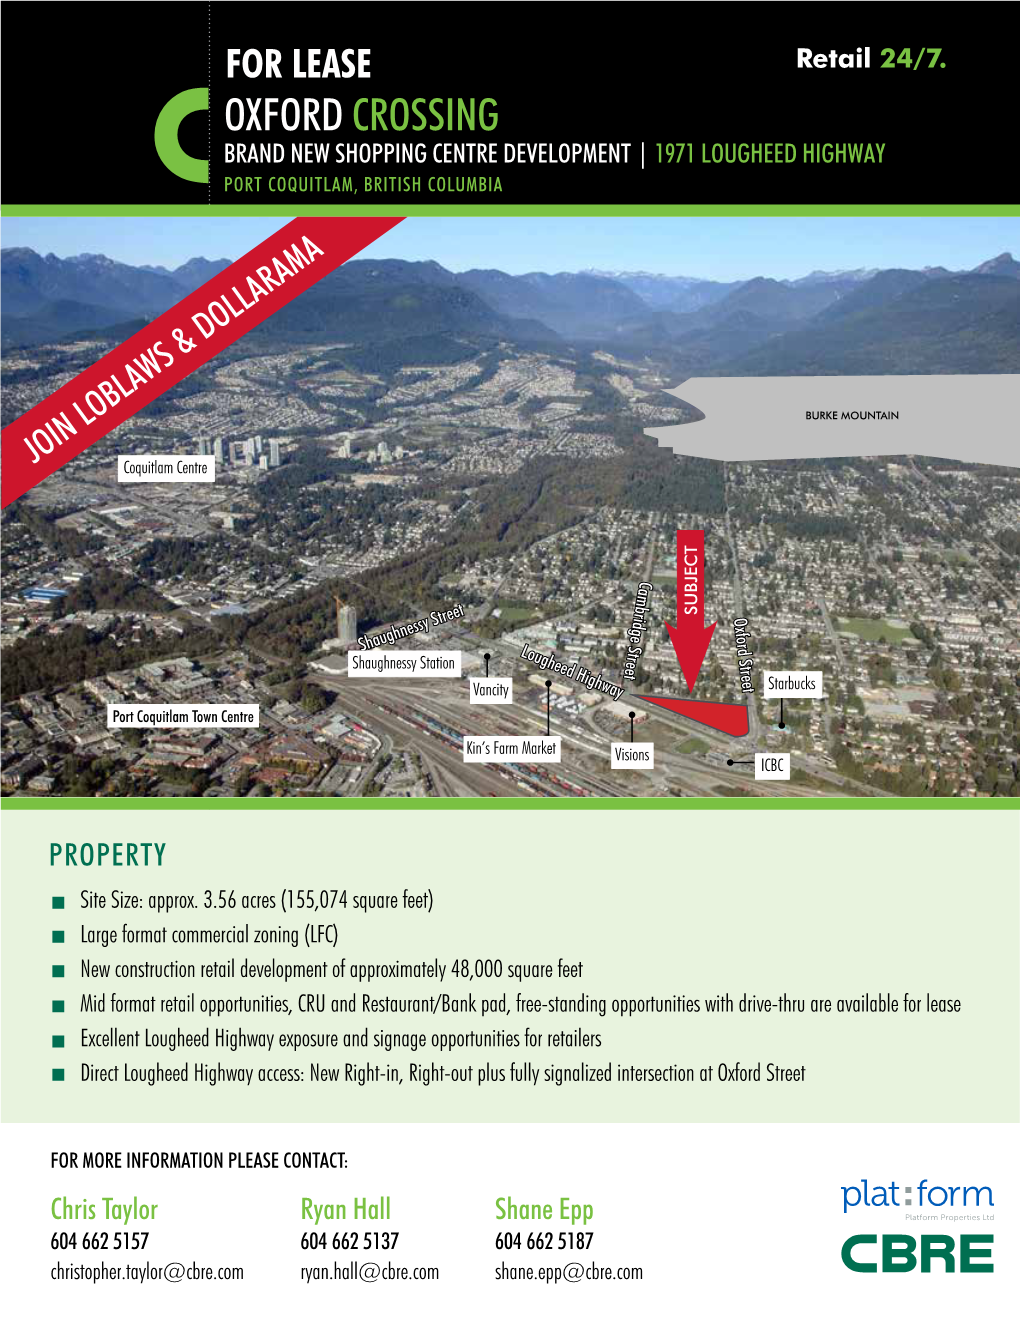 FOR LEASE Oxford Crossing Brand New Shopping Centre Development | 1971 Lougheed Highway PORT COQUITLAM, British Columbia